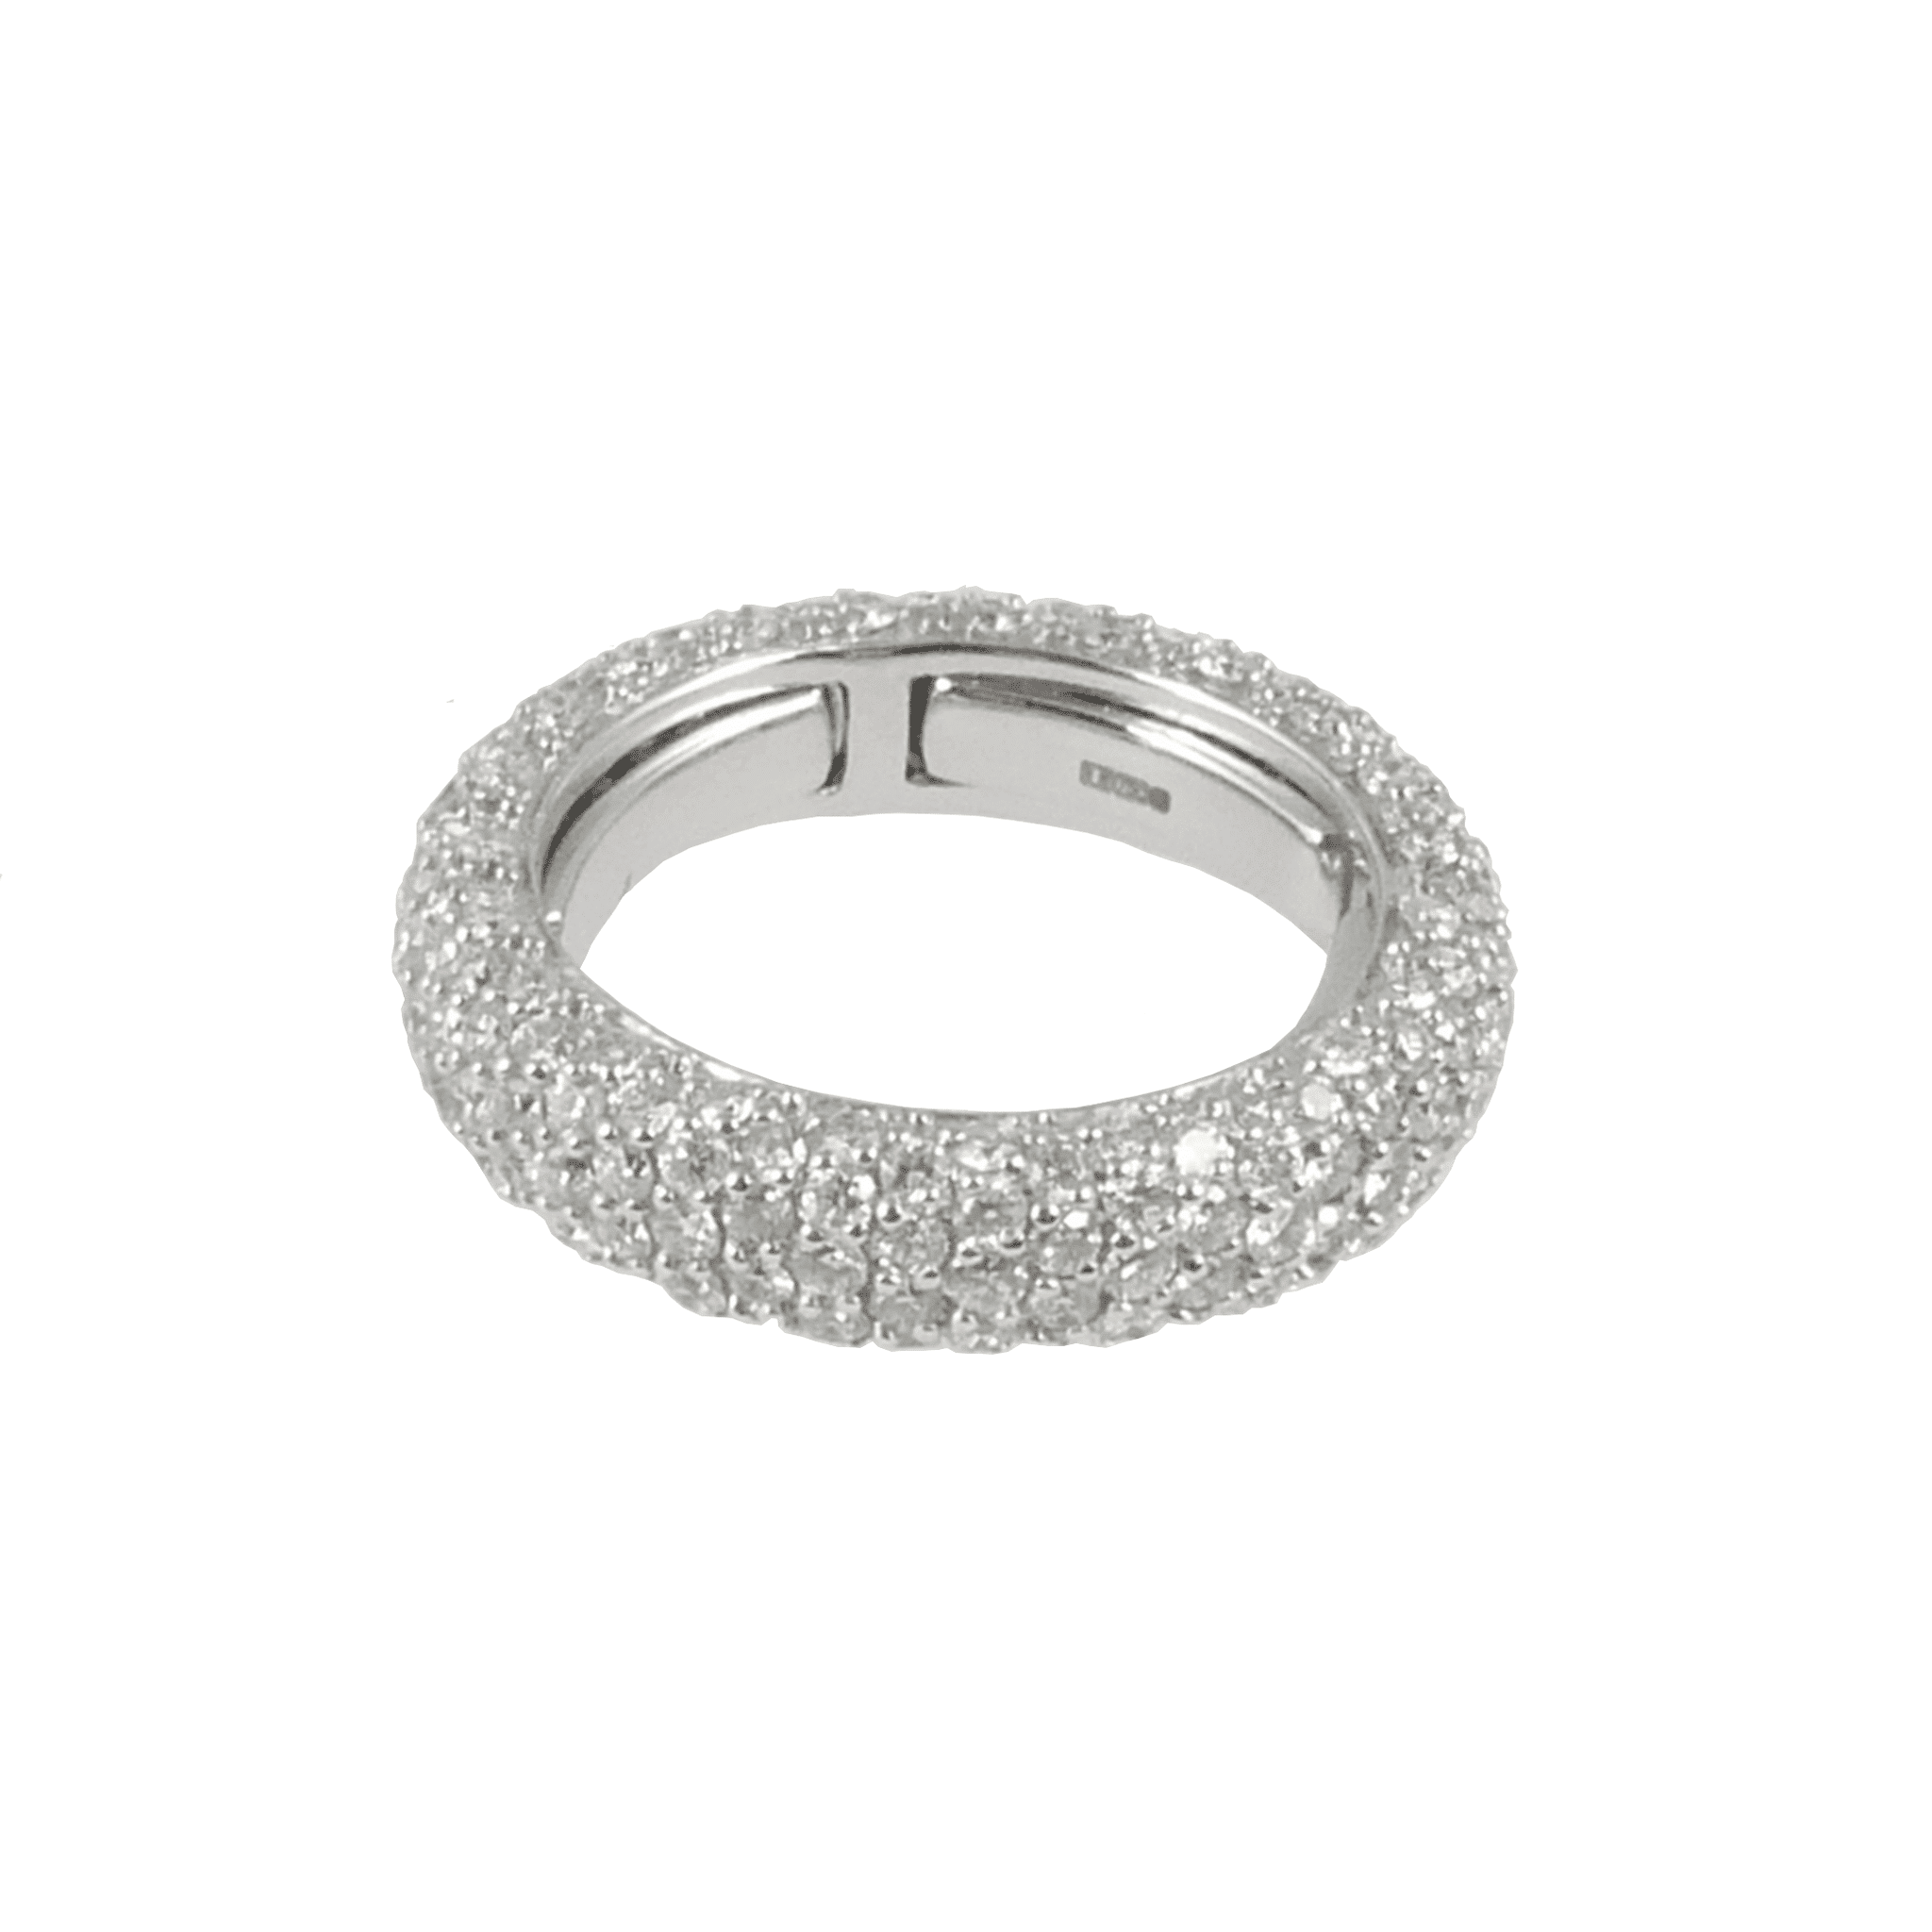 18ct White Gold Pave Diamond Ring, 3.05cts